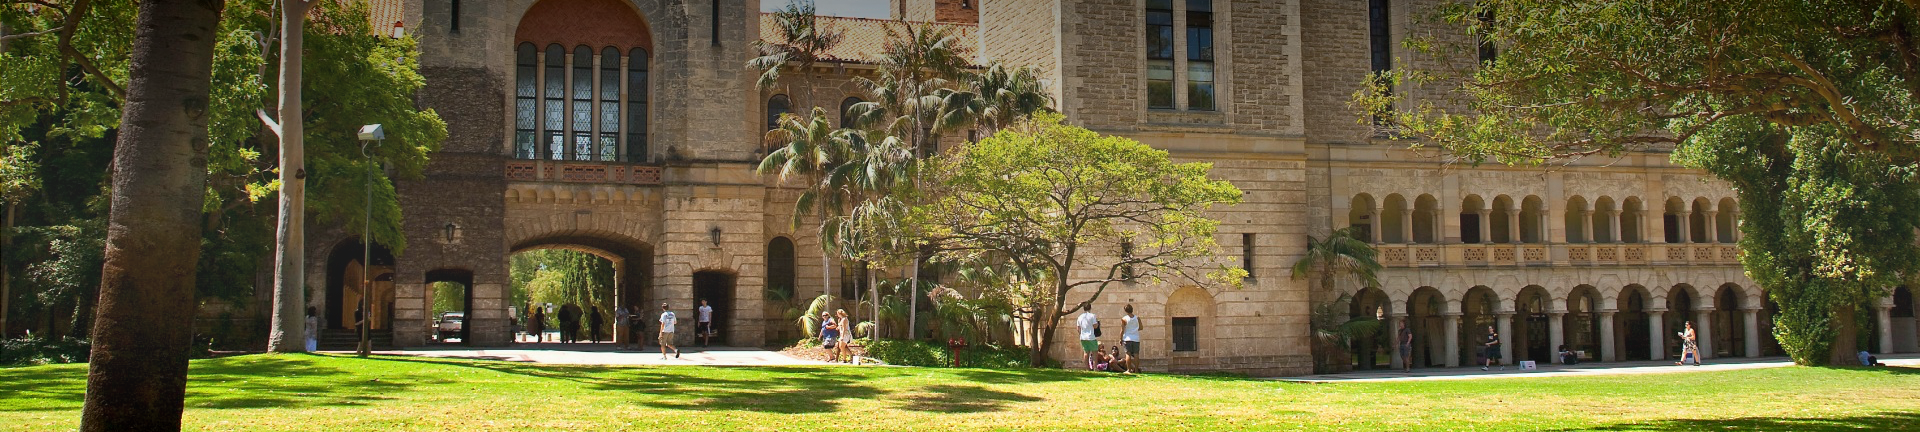 Campus and quad view with students of the University of Western Australia